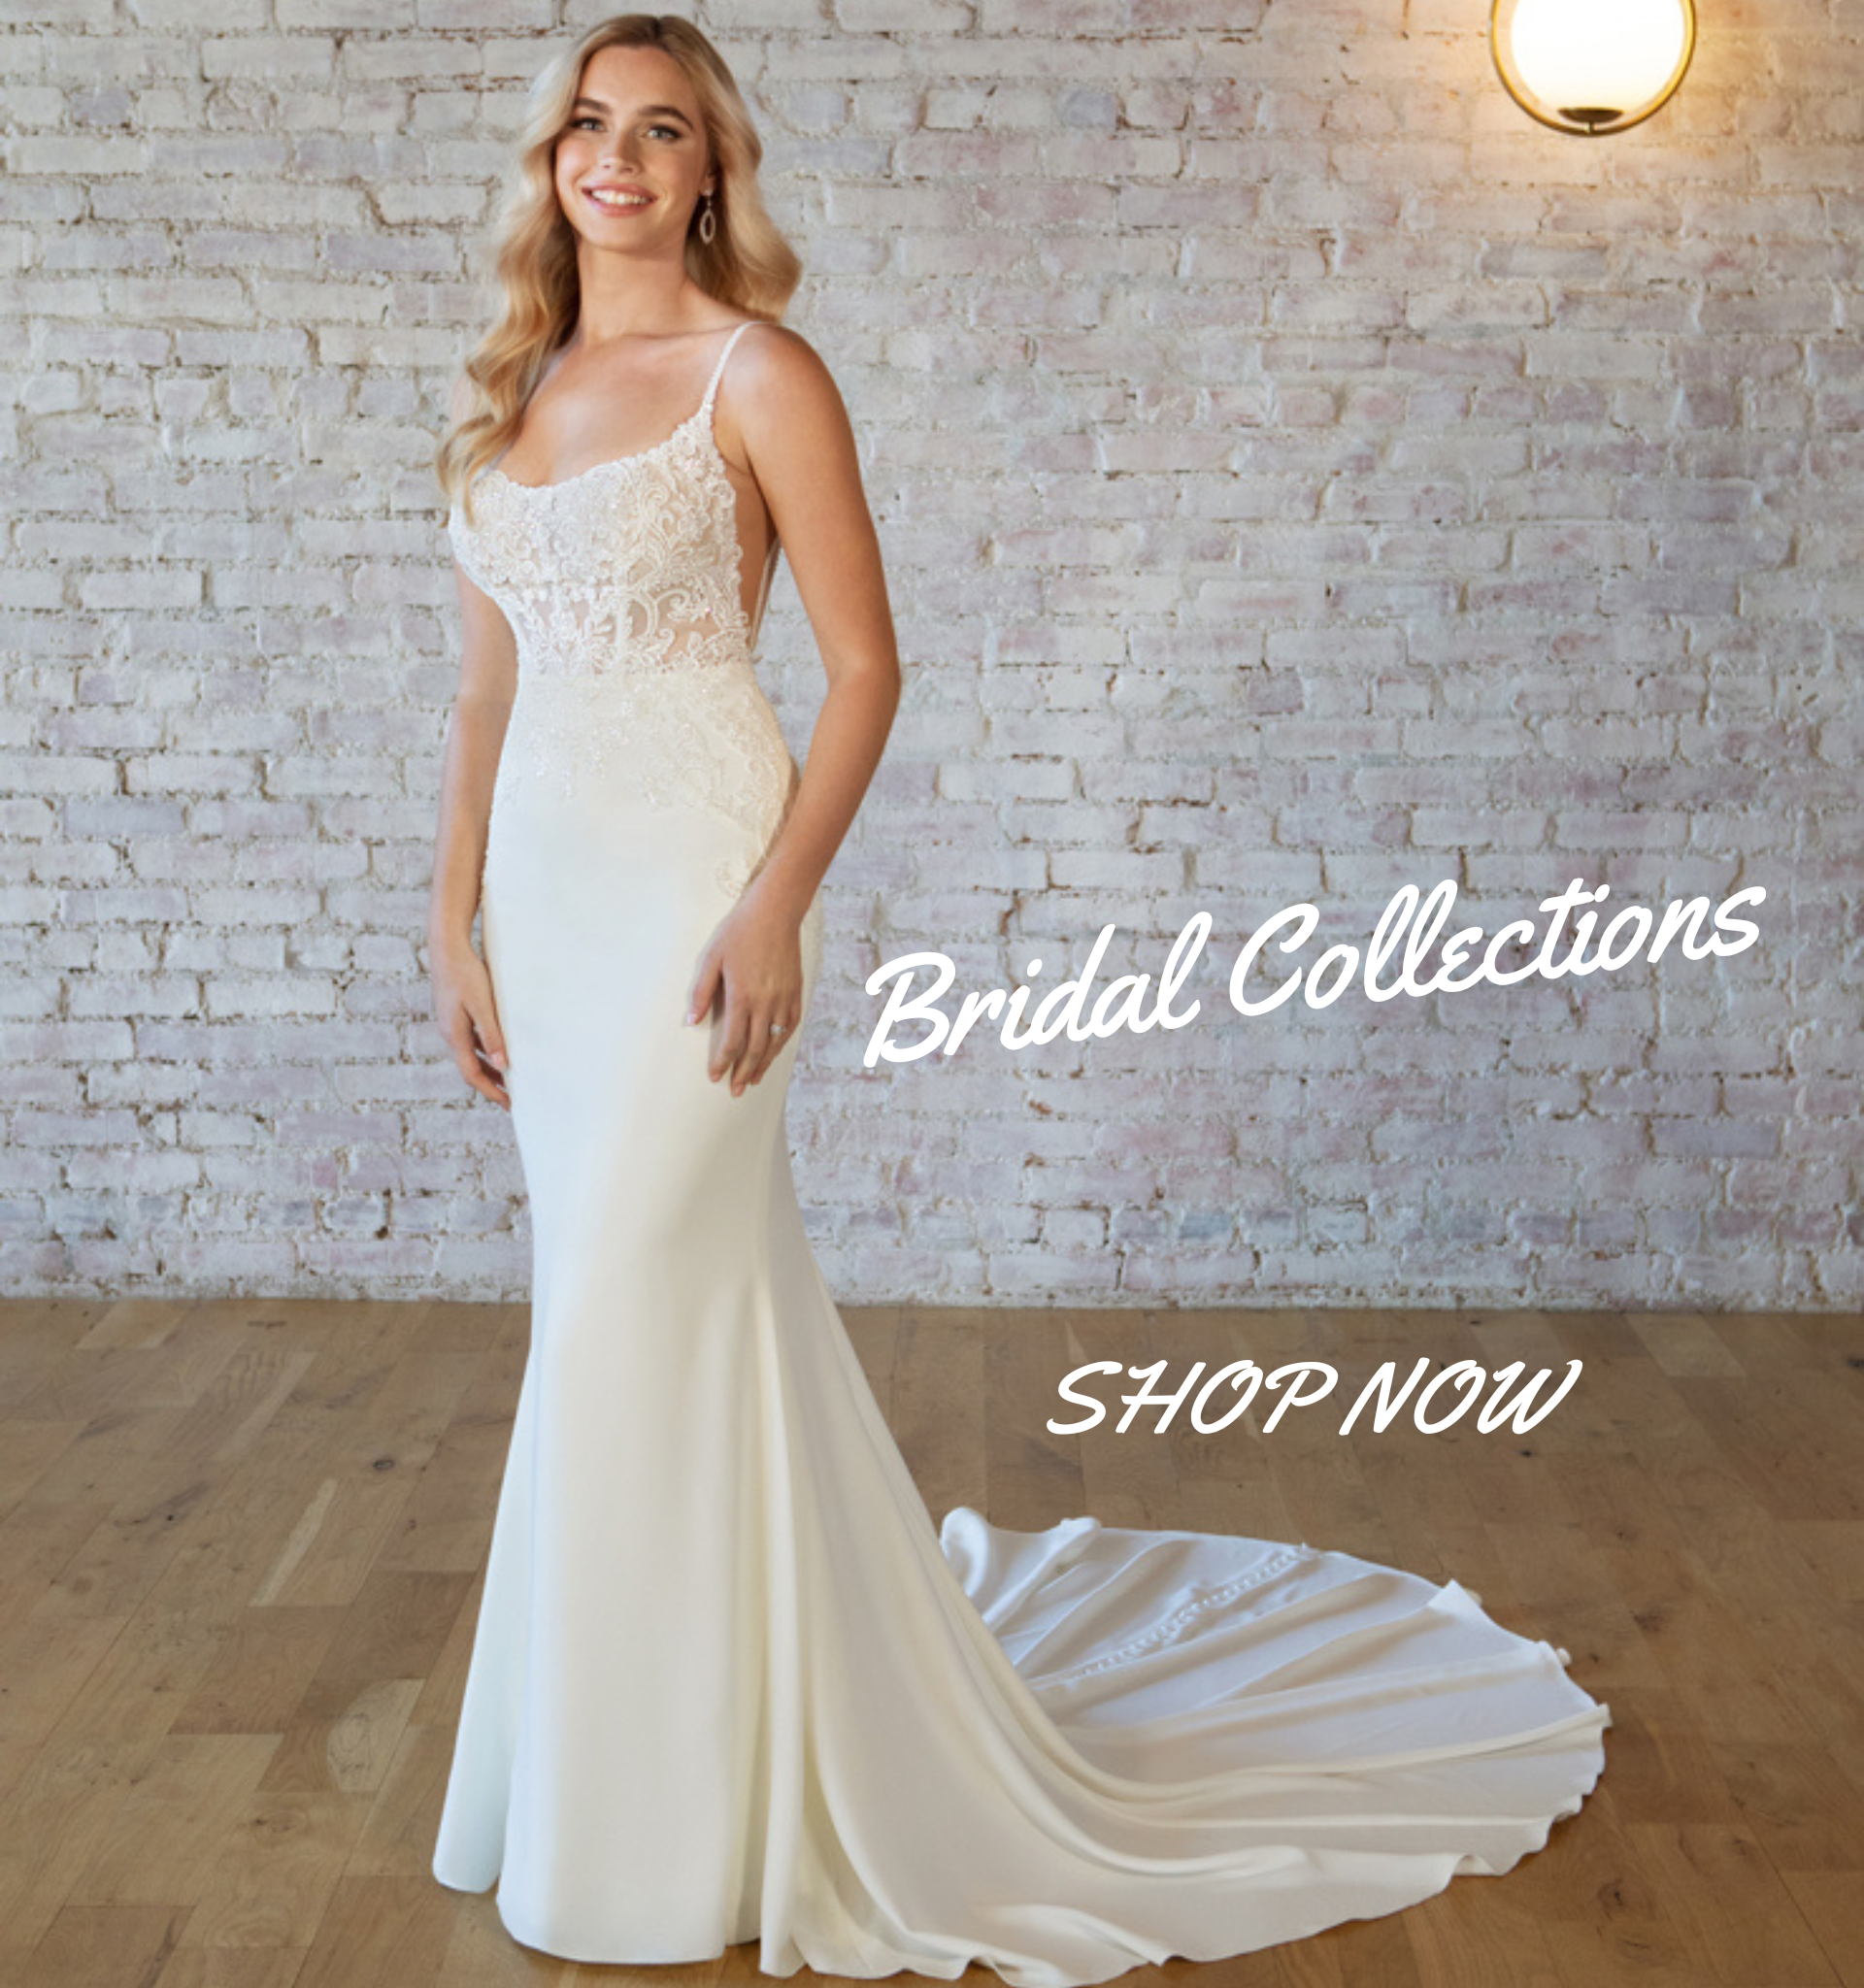 Wedding Dresses San Diego  Top Bridal Gown Collection